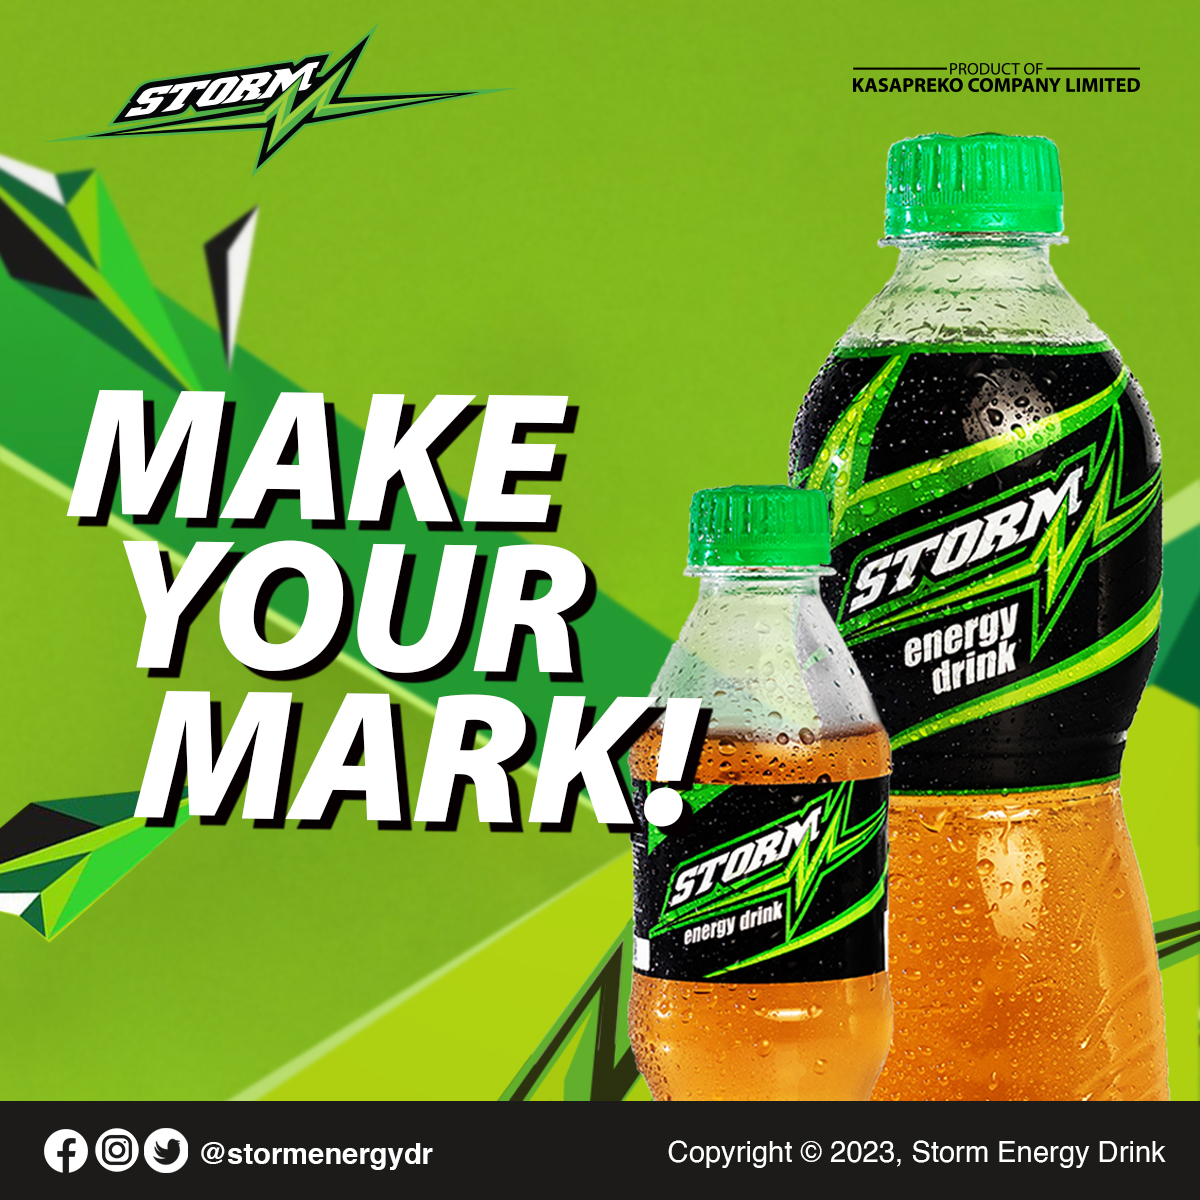 Power through your day with every sip of our energy drink. #MakeYourMark' #stormenergydrink #storm #monster #energy #drinks #energydrink #motivation #focus #power #dreamchasers #stormtrooper #lifestlye #dailymotivation #success #kasapreko